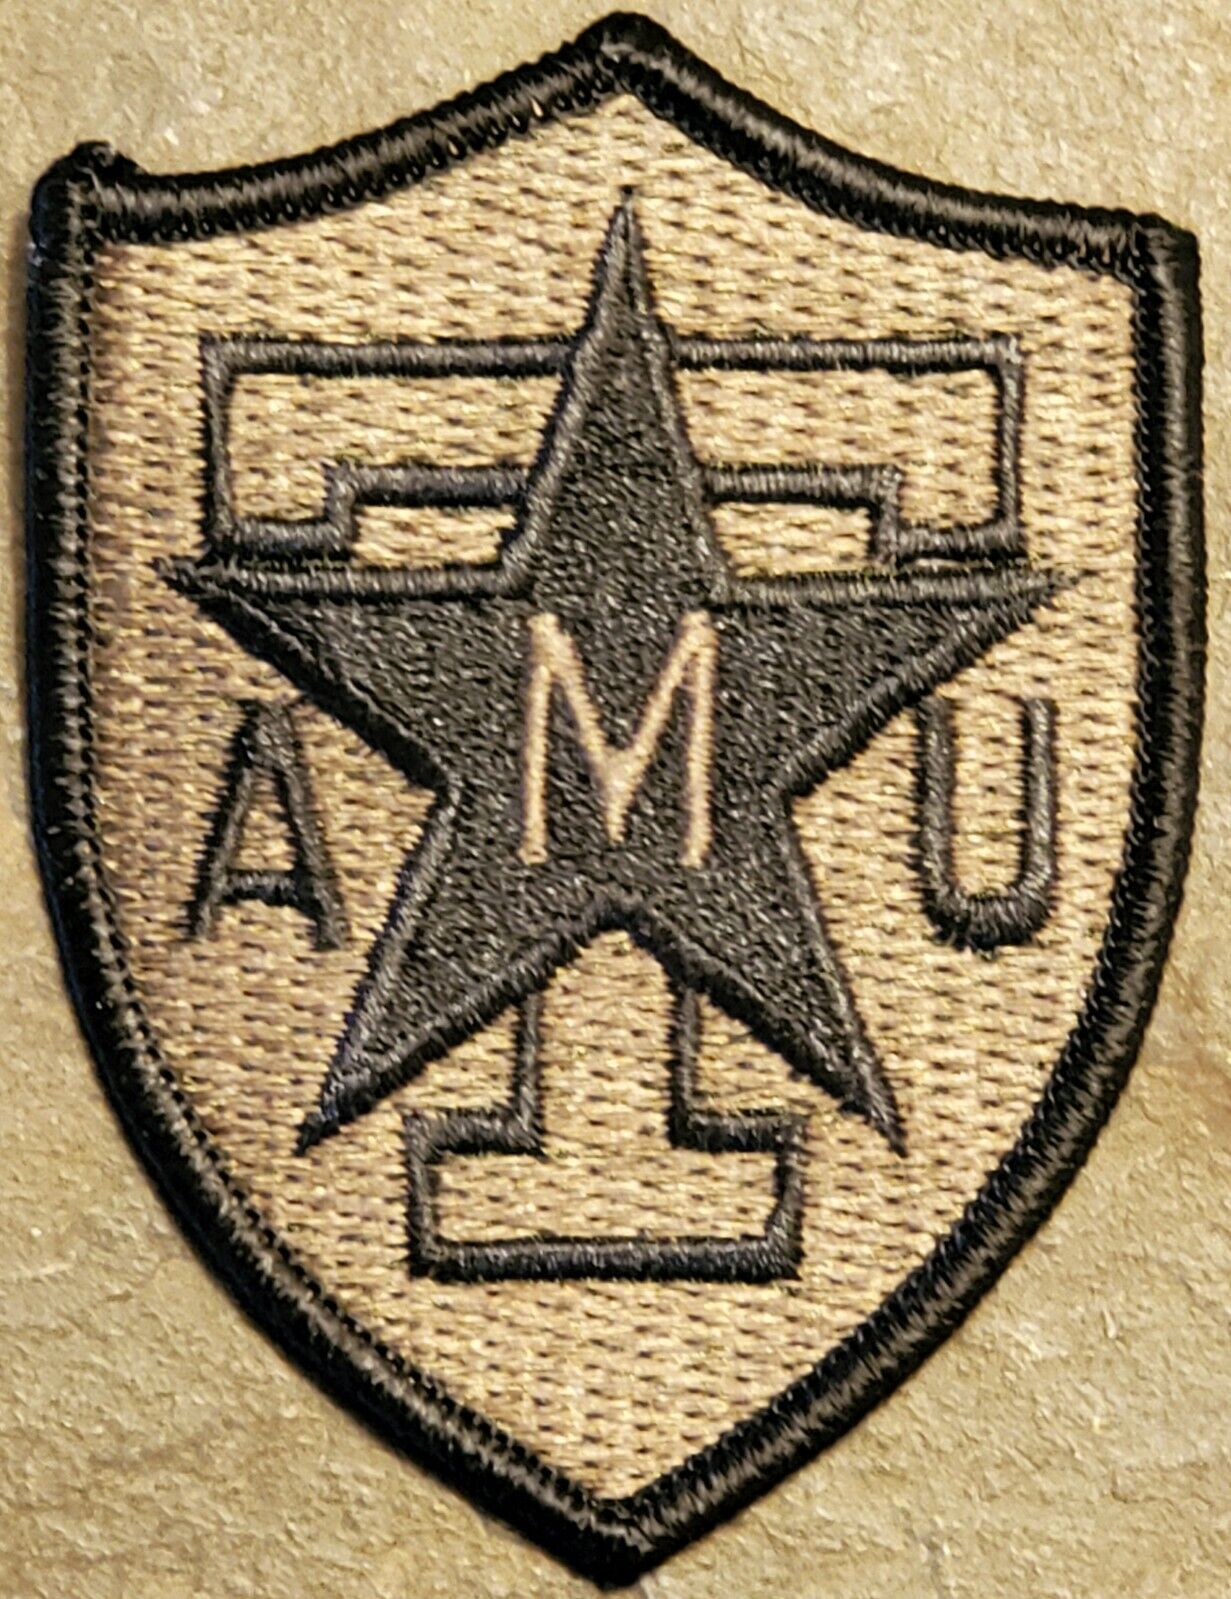 Texas A & M Corps of Cadets ARMY ROTC Subdued Patch Insignia Badge Crest VTG ORG